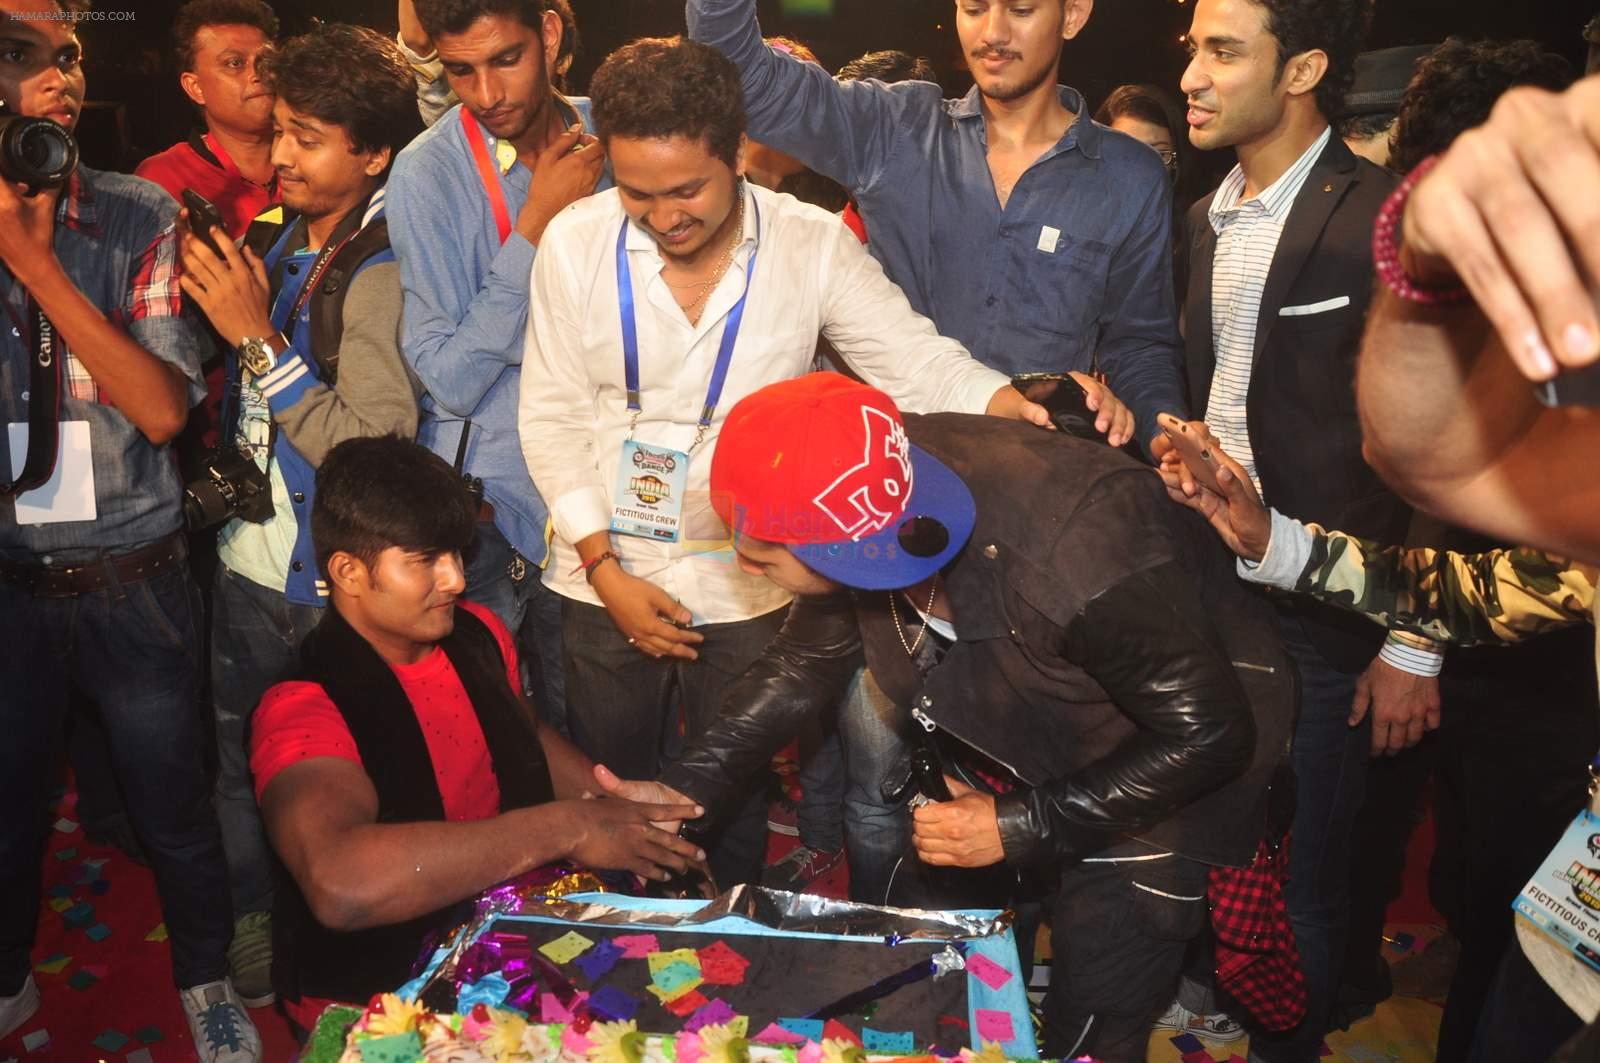 Varun Dhawan at dance competition in Vasai on 25th April 2015